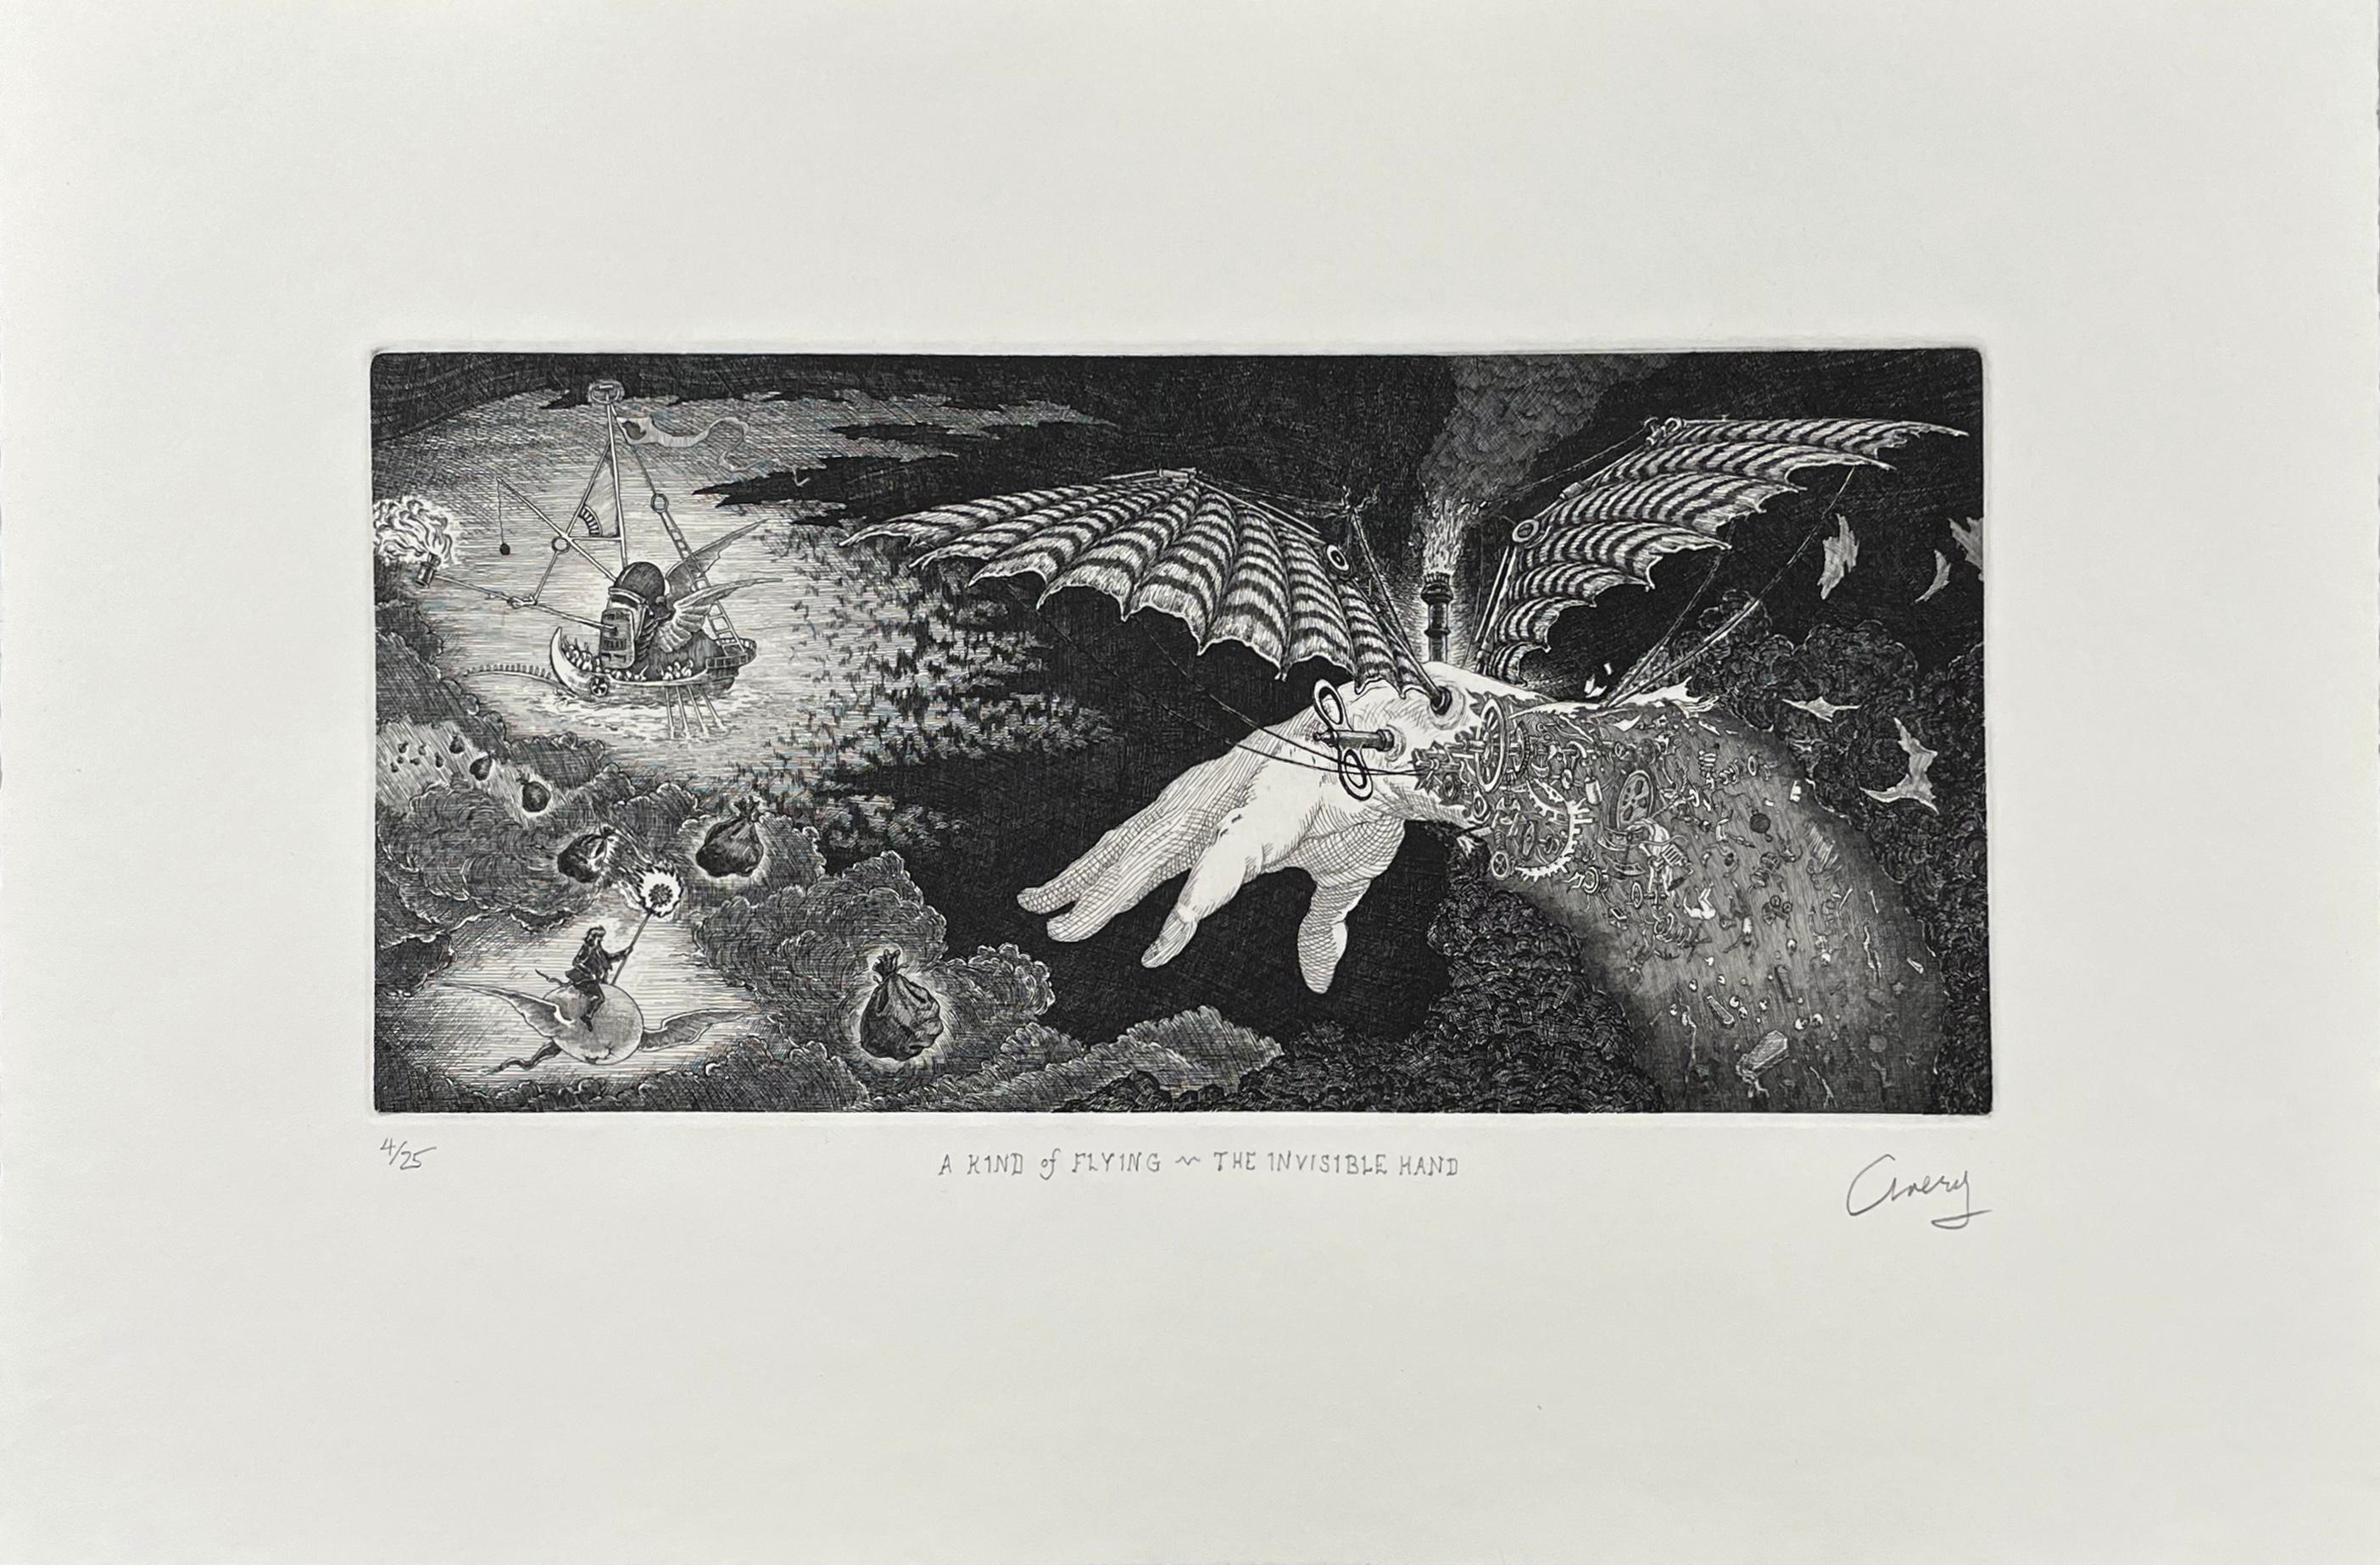 A Kind of Flying -The Invisible Hand - Print by David Avery